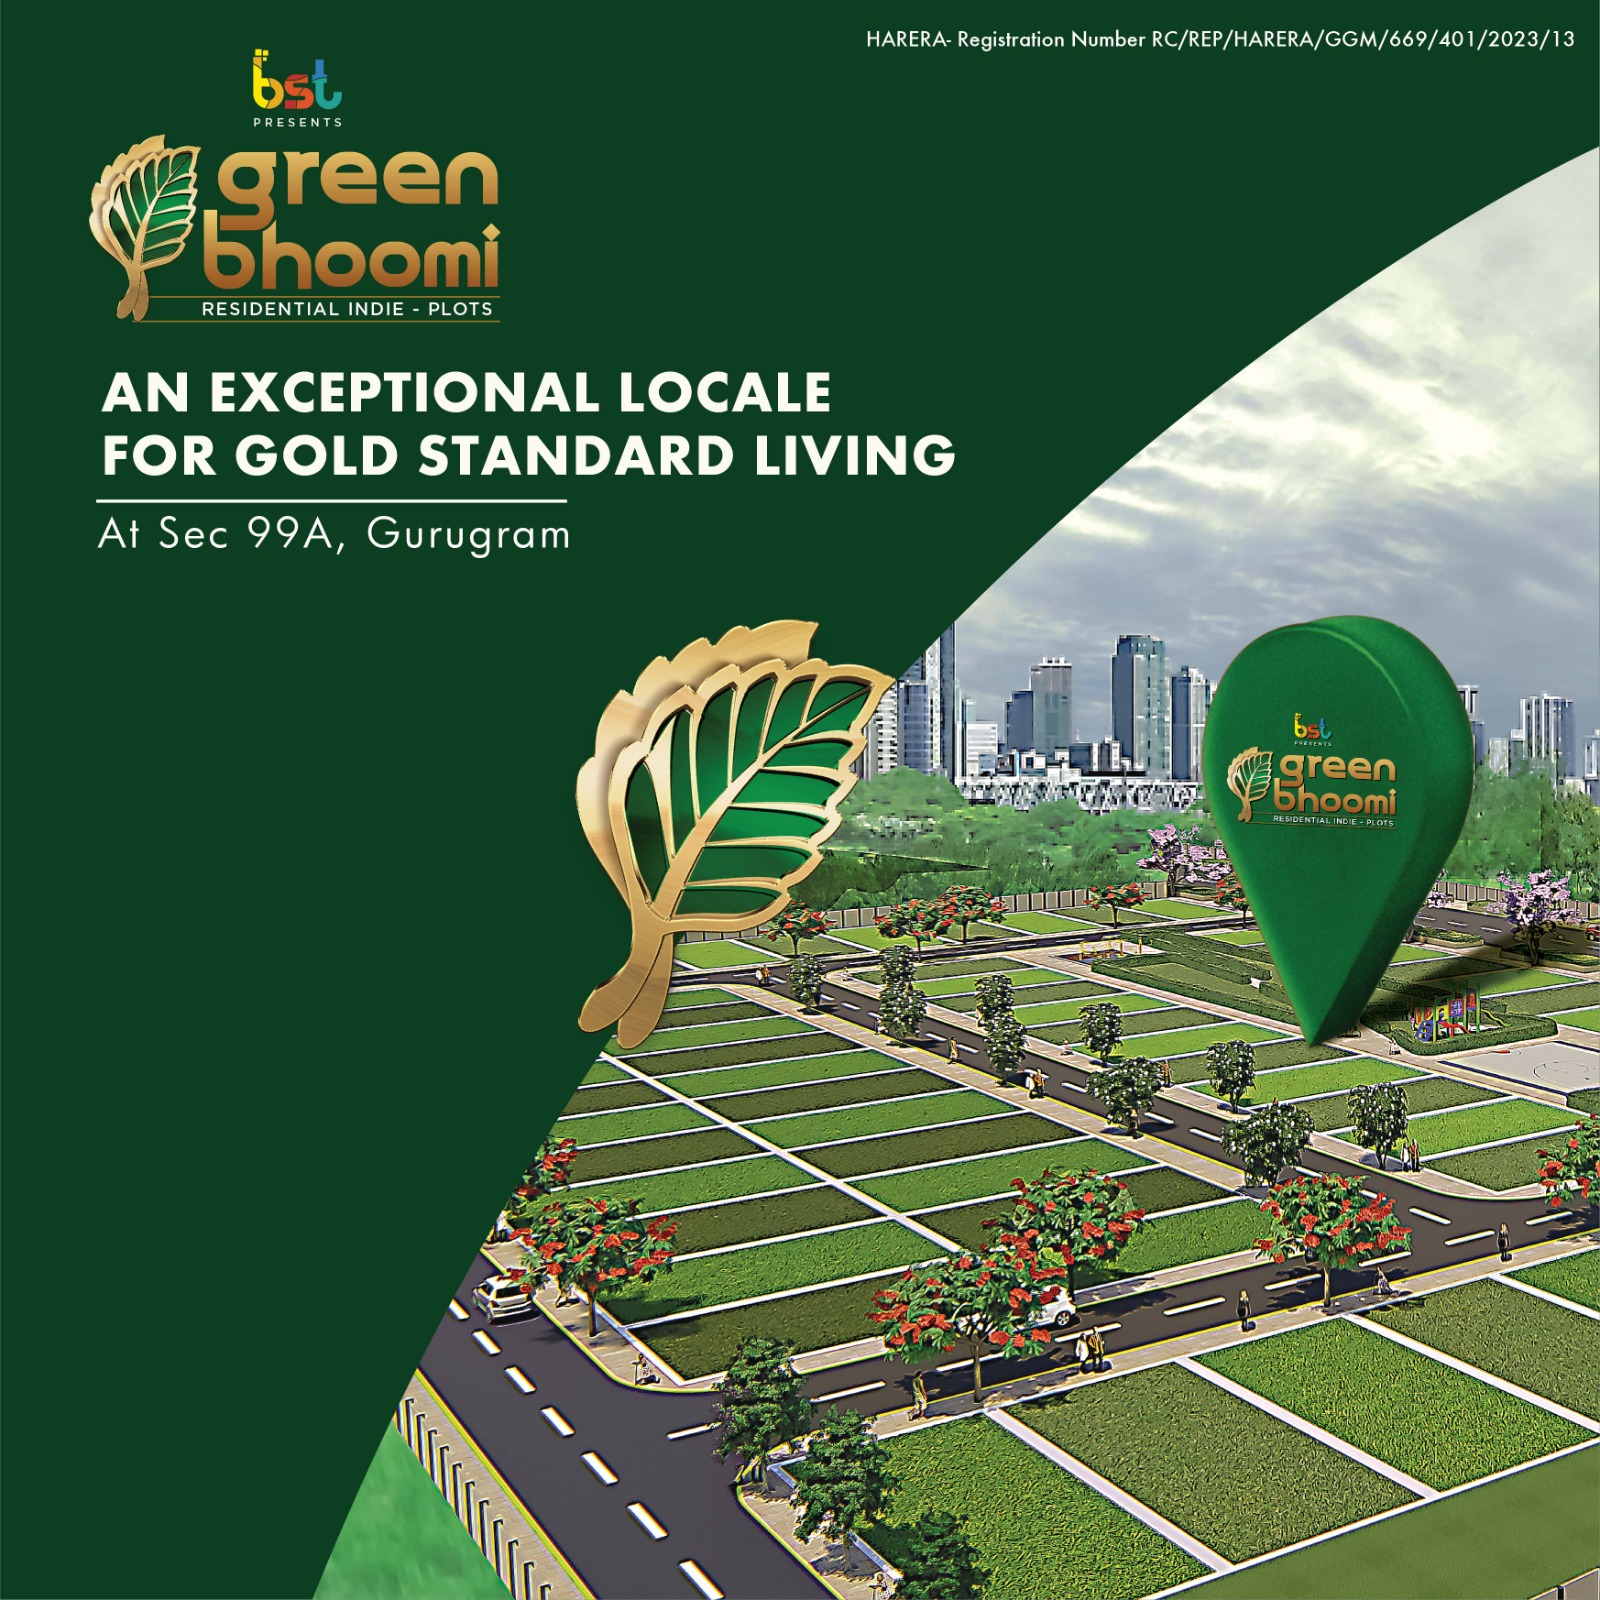 BST Green Bhoomi Plots an exceptional locale for gold standard living at Sector 99A, Gurgaon